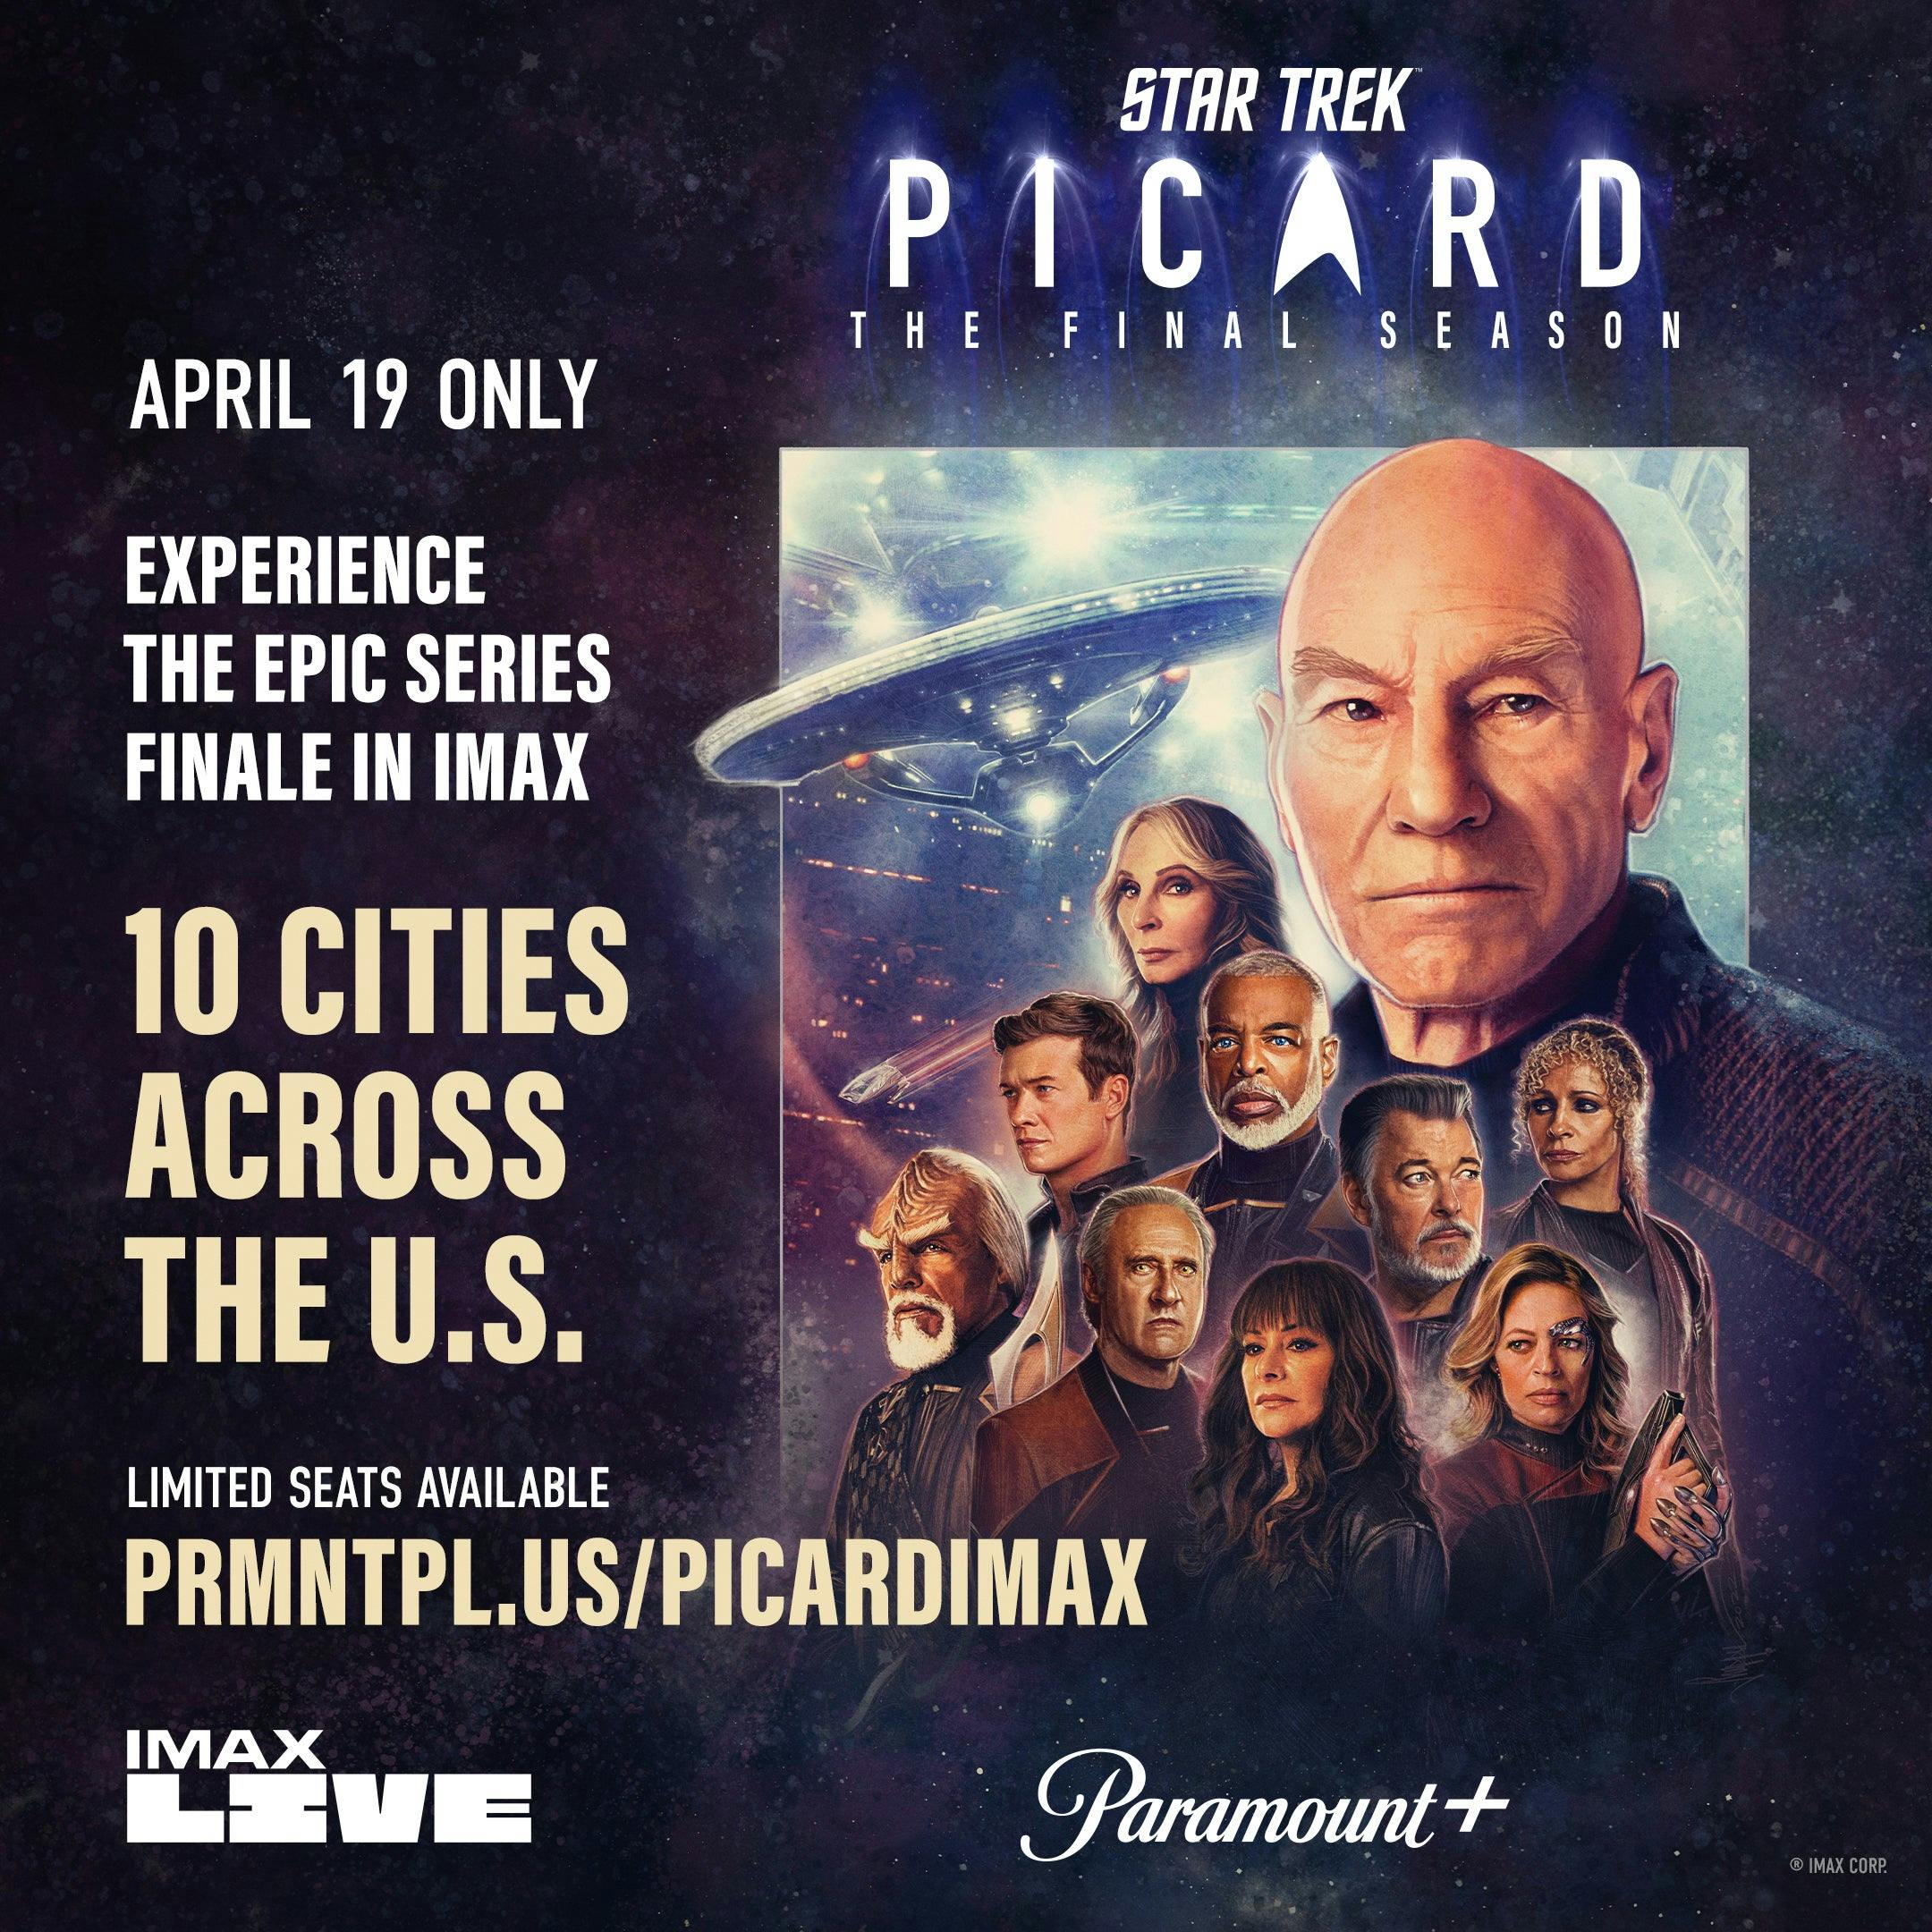 Copy along the left side sharing details about the IMAX LIVE event and Picard season three key art to the left. IMAX LIVE logo in the bottom left and Paramount+ logo in the bottom right corner.